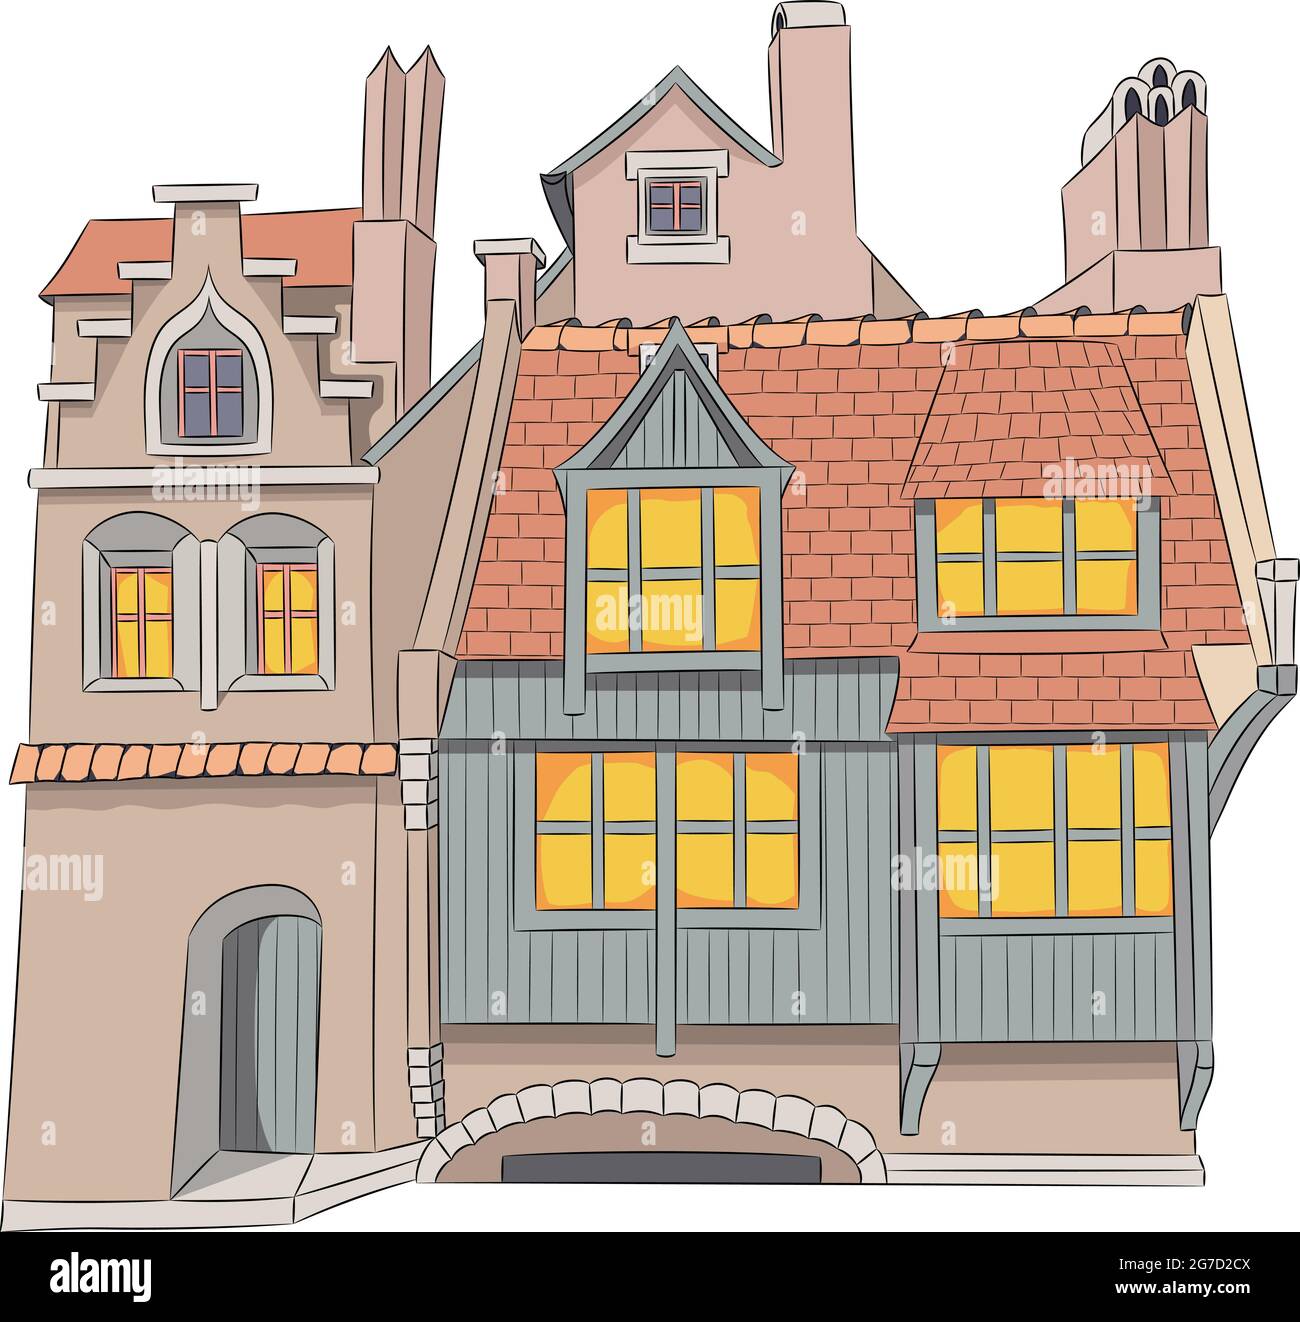 View of the facades of old traditional stone houses with tiled roofs. Bruges. Belgium. Stock Vector